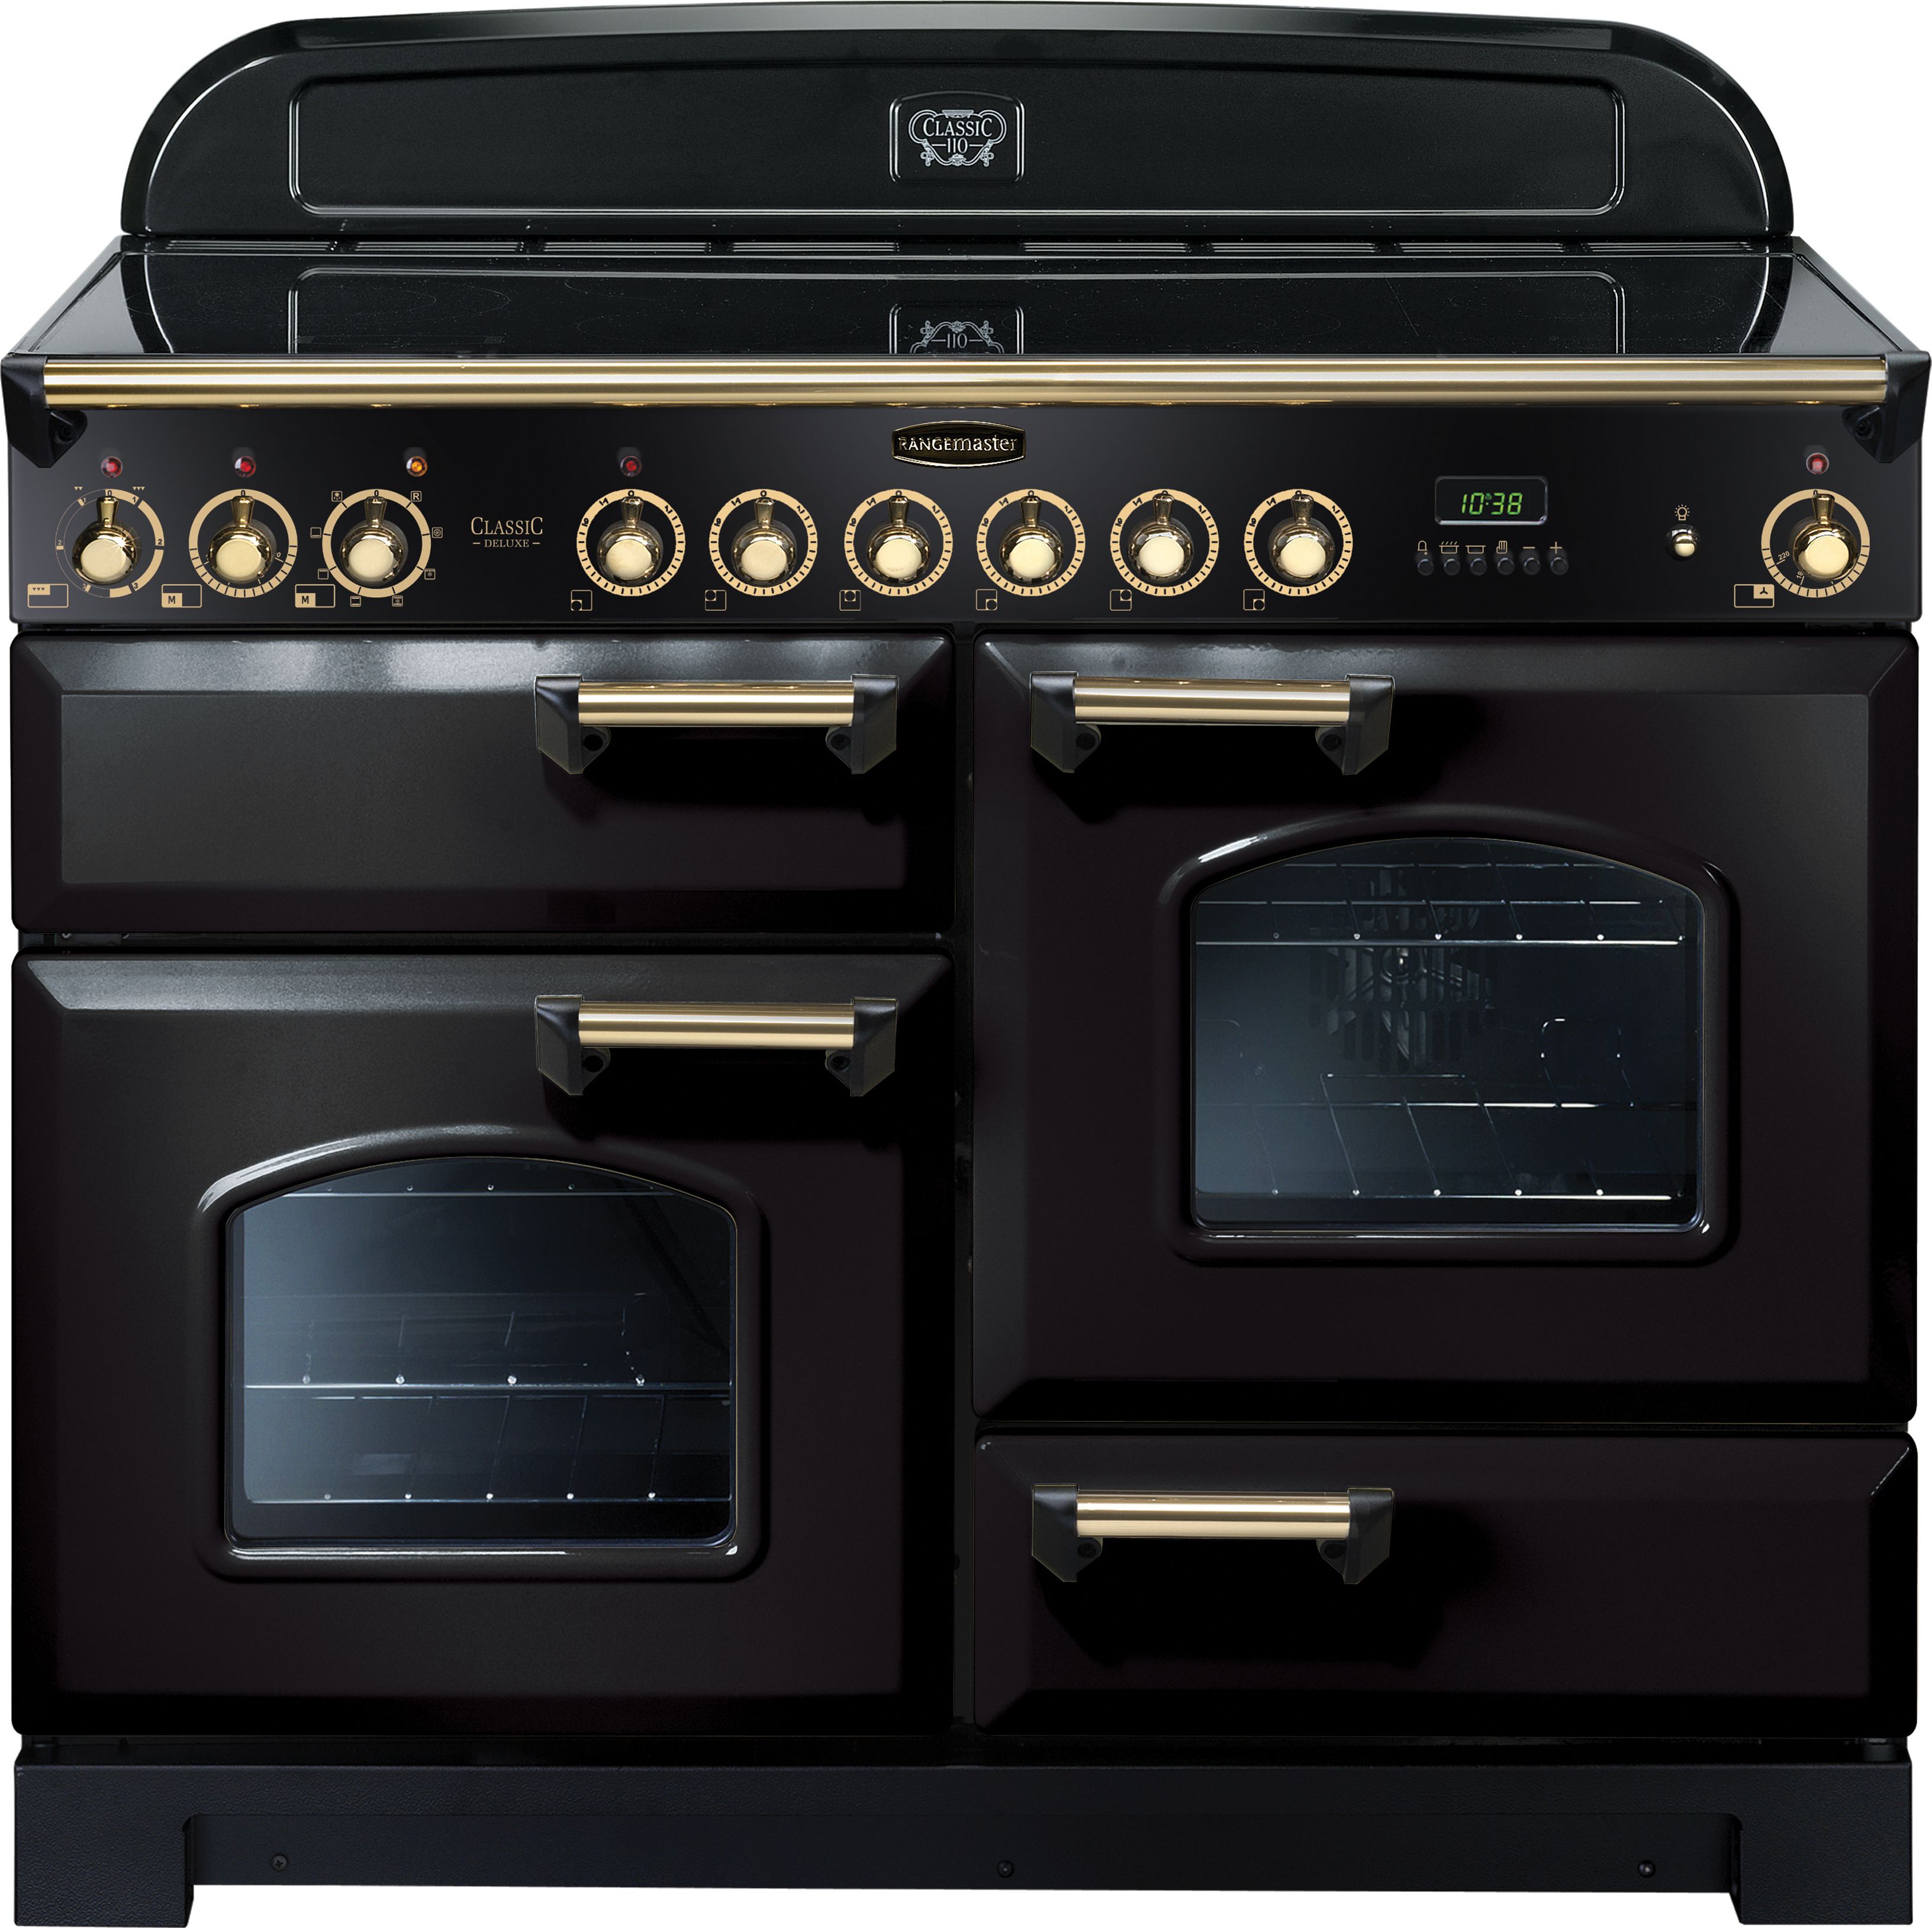 Rangemaster Classic Deluxe CDL110ECBL/B 110cm Electric Range Cooker with Ceramic Hob - Black / Brass - A/A Rated, Black